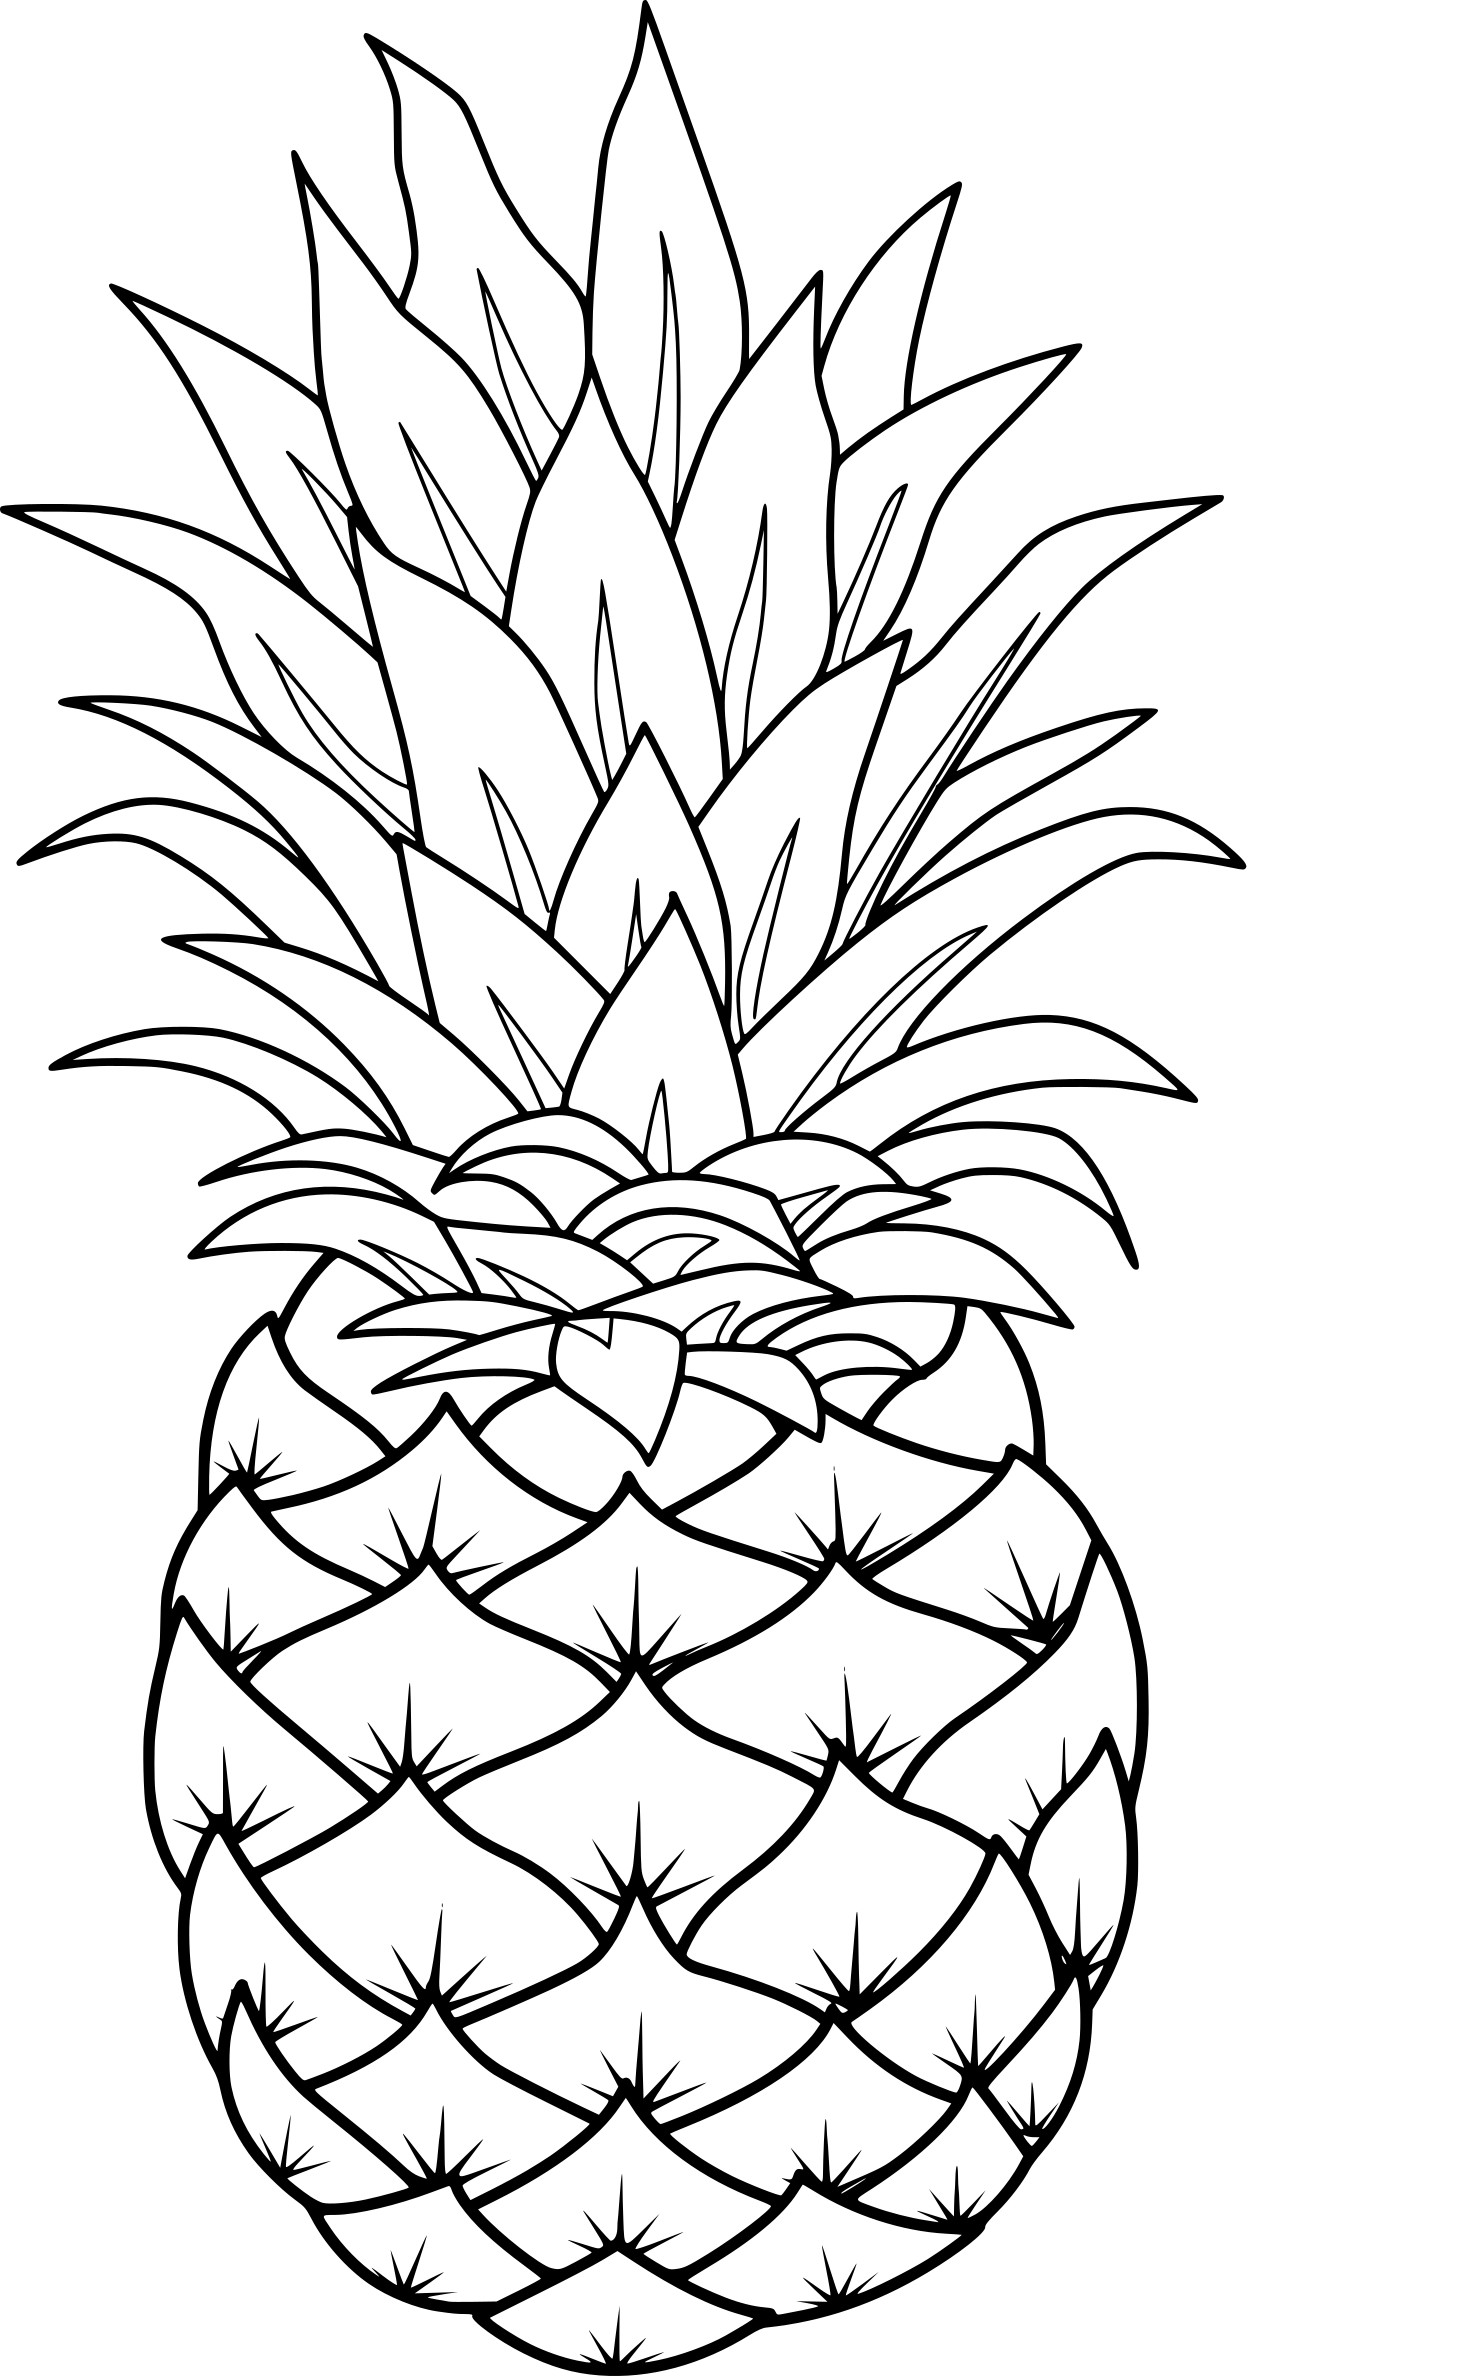 coloring book ~ Pineapple Coloring Page Book Sheets Picture Inspirations  For Kidso Printemplate Pdf 73 Pineapple ...